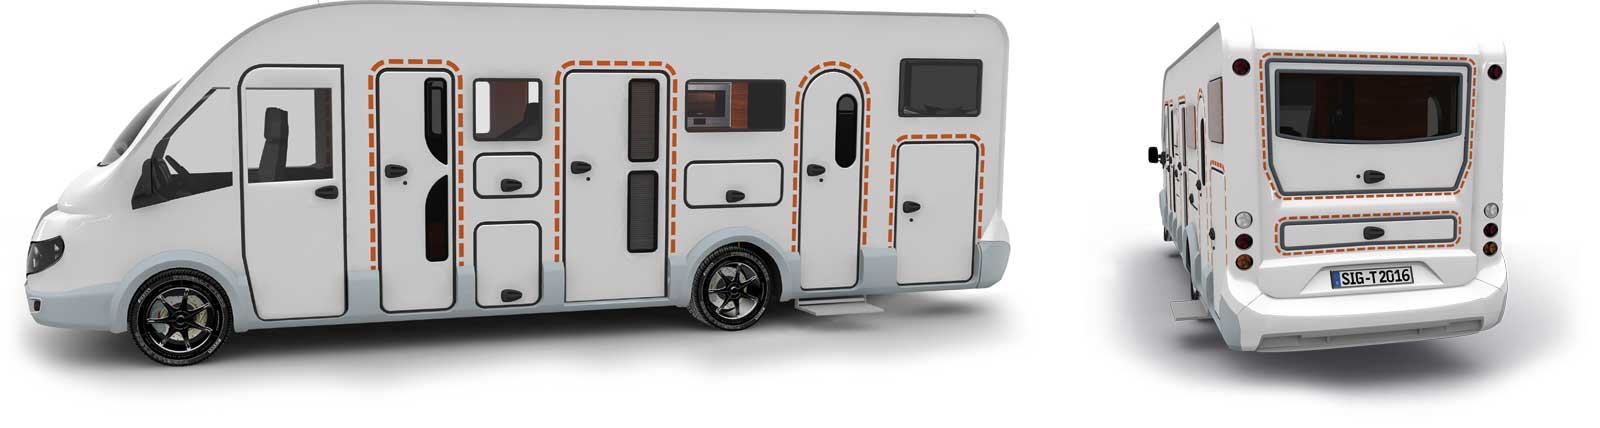 Satisfied tegos customers with Eura Mobil caravans and RVs